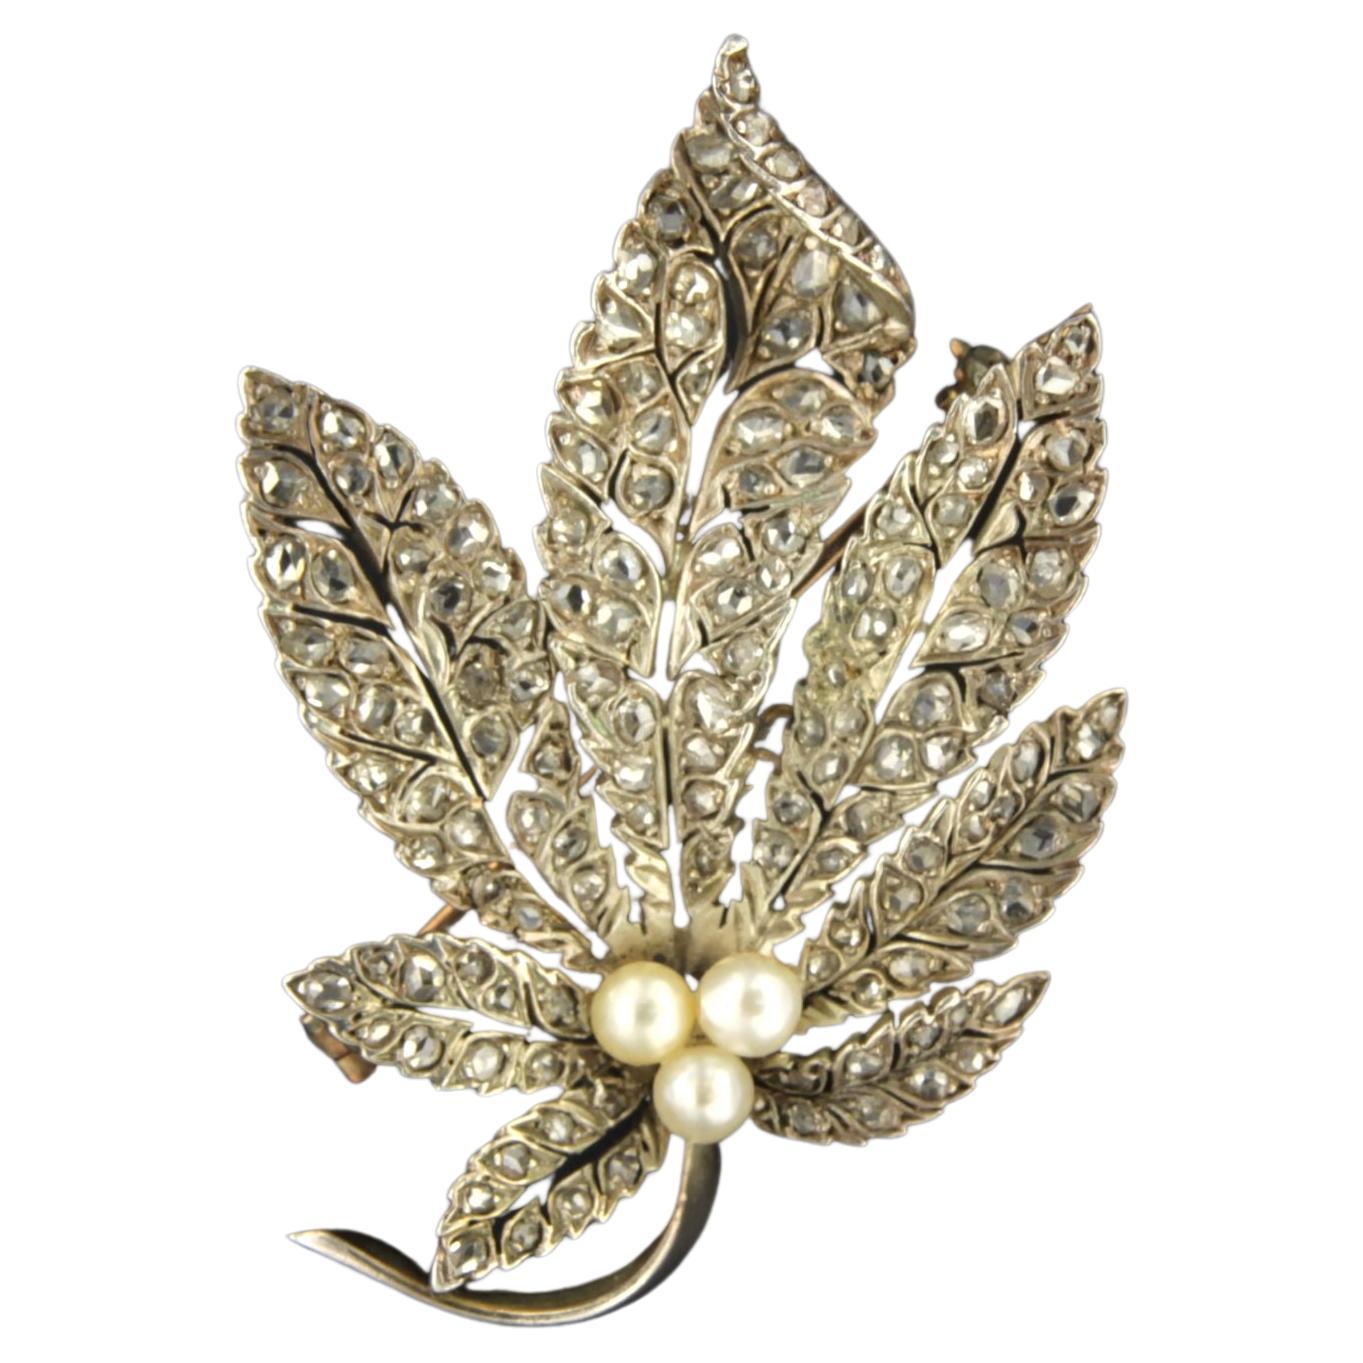 Antique Gold with Silver Diamond Brooch